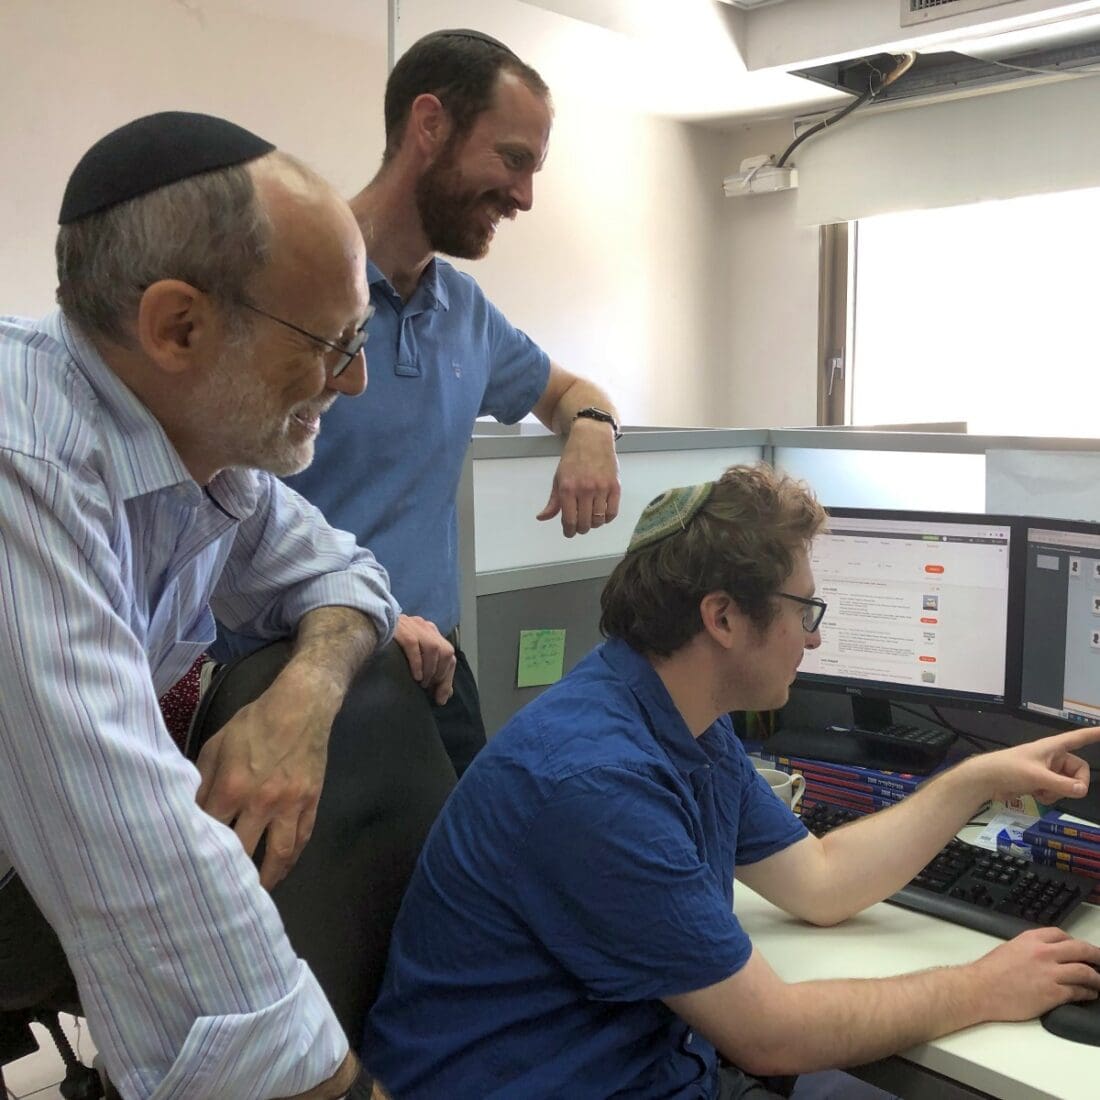 From left, Jonathan Kirsch, department head in the unit for the location and restitution of unclaimed property; JCT team leader Avraham Schumacher; and researcher Quincy Barrett discussing a JCT file.